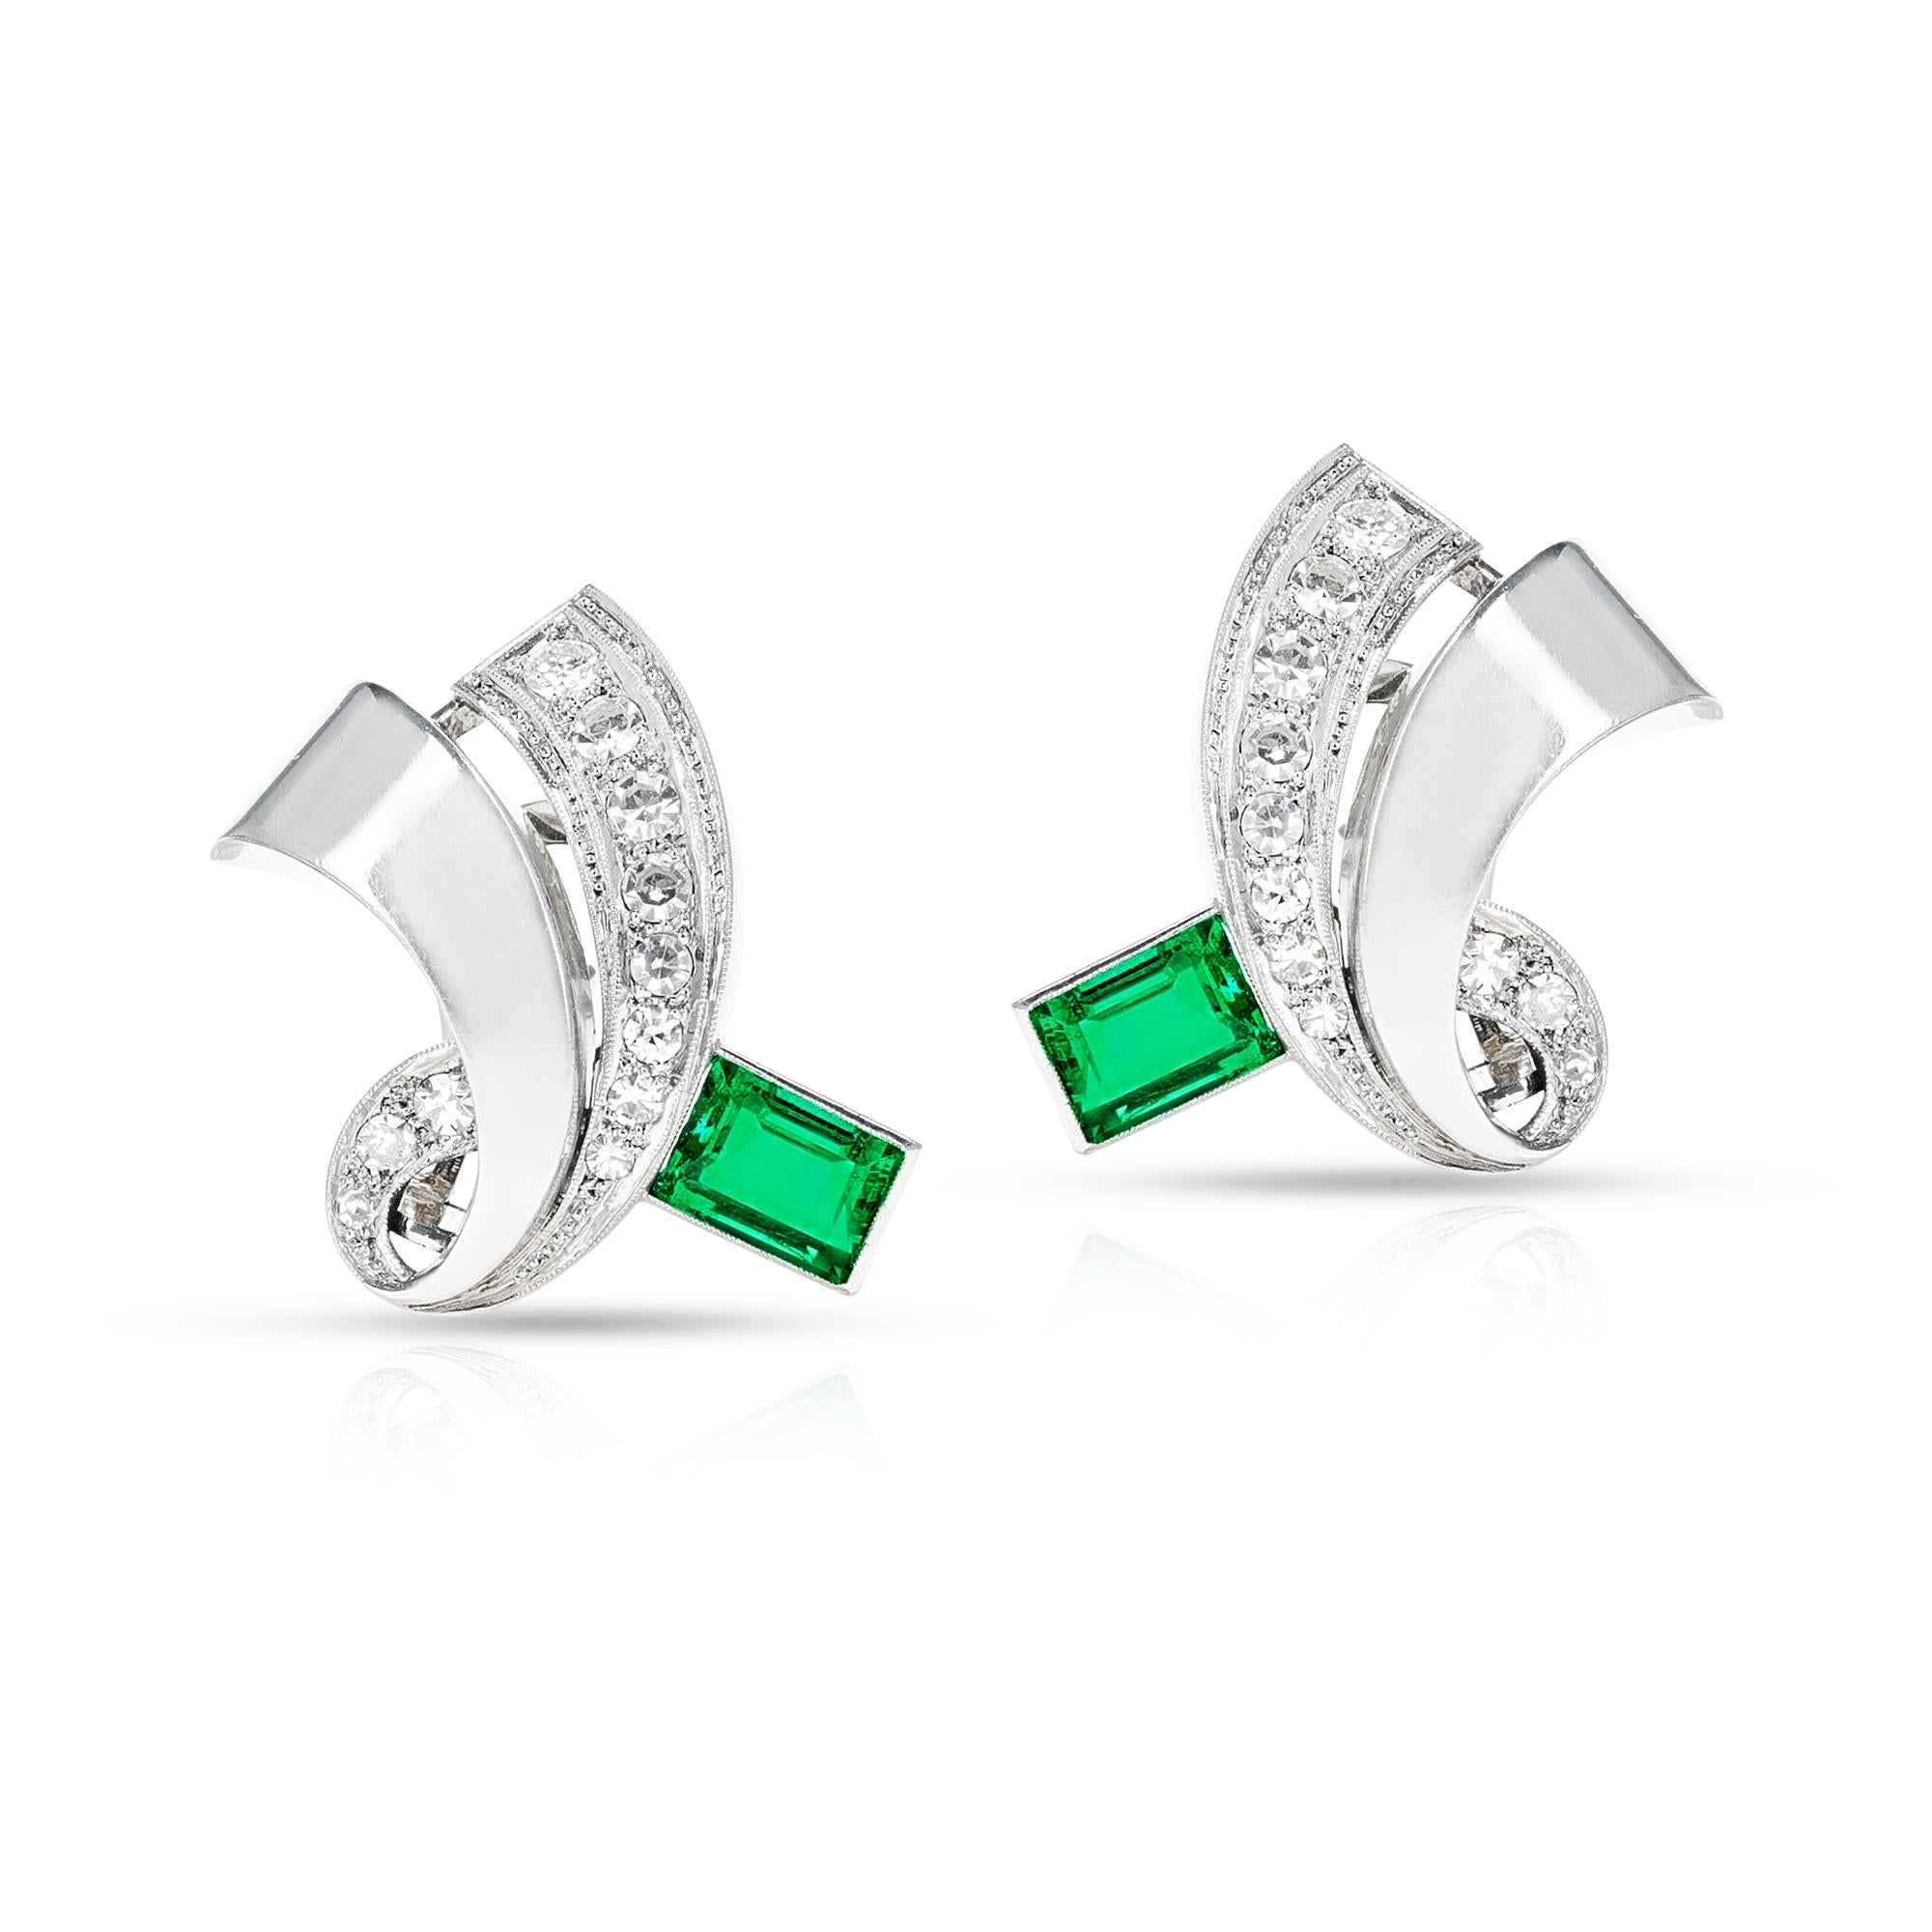 A pair of GIA Certified Natural Rectangular Colombian Emeralds and Diamond Earrings made in Platinum. The emeralds weigh 1.12 carats and 1.15 carats. The total weight of the earrings is 14.50 grams. 